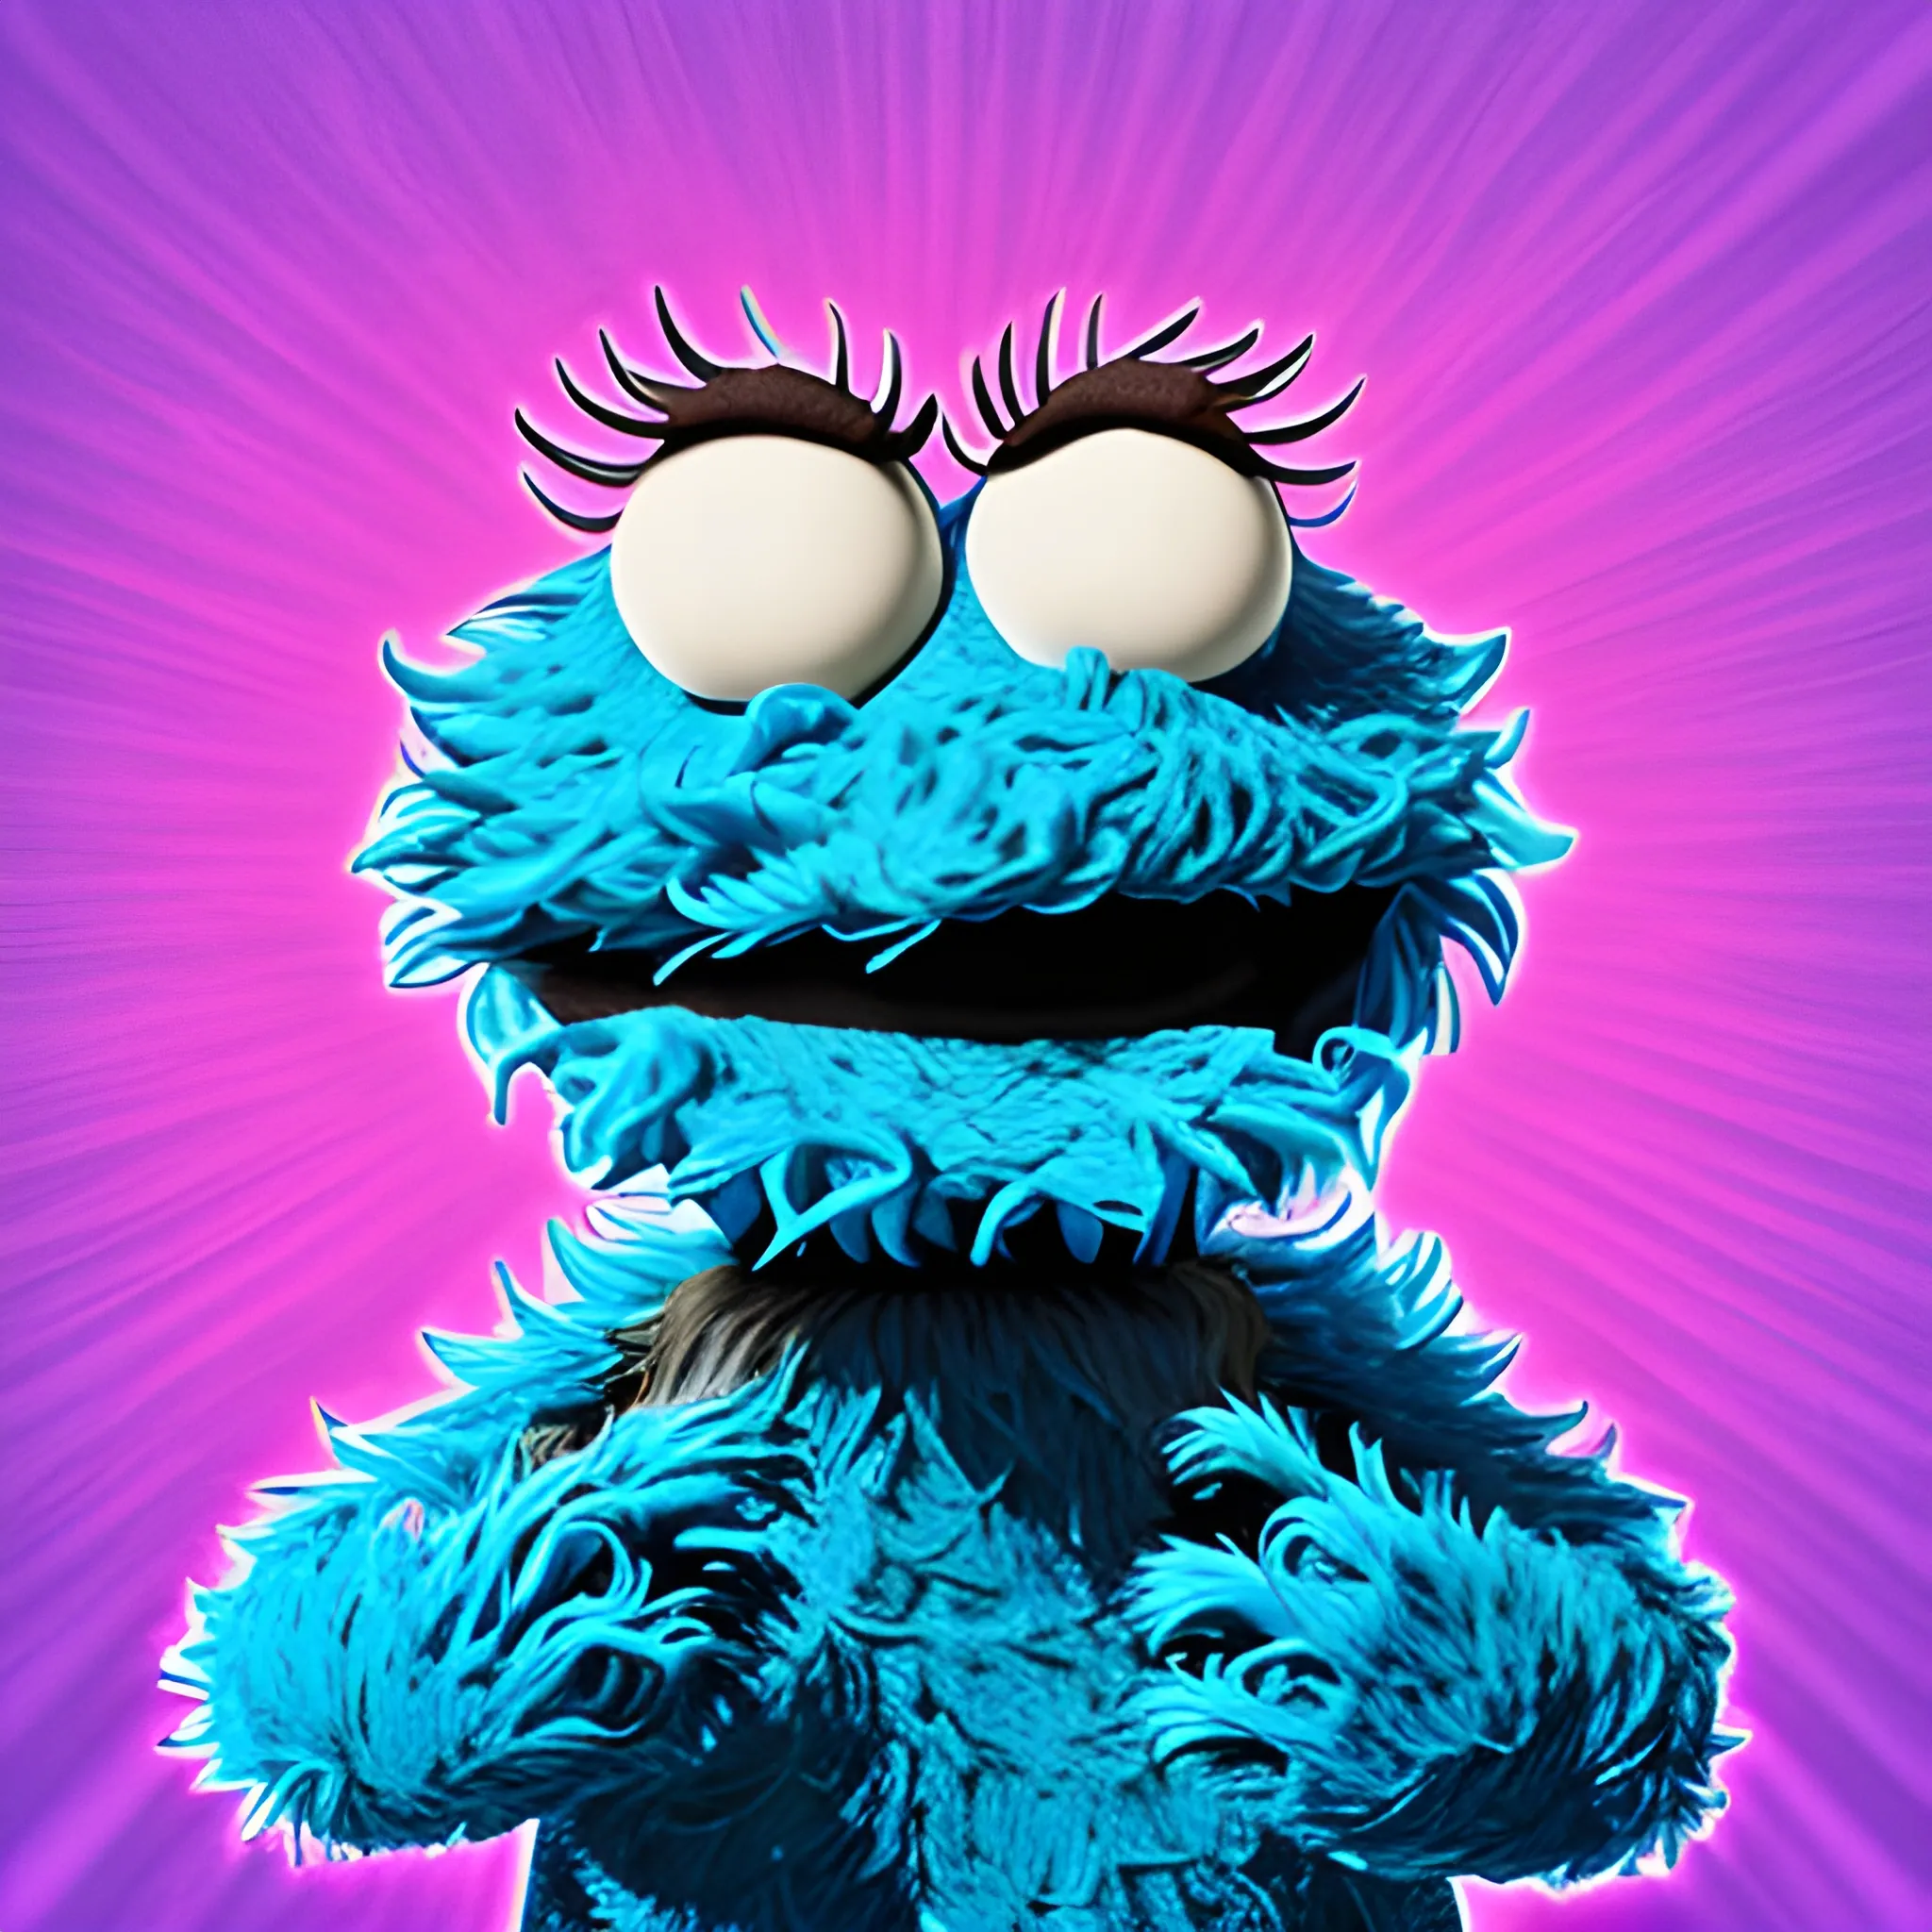 cookie monster
, Trippy